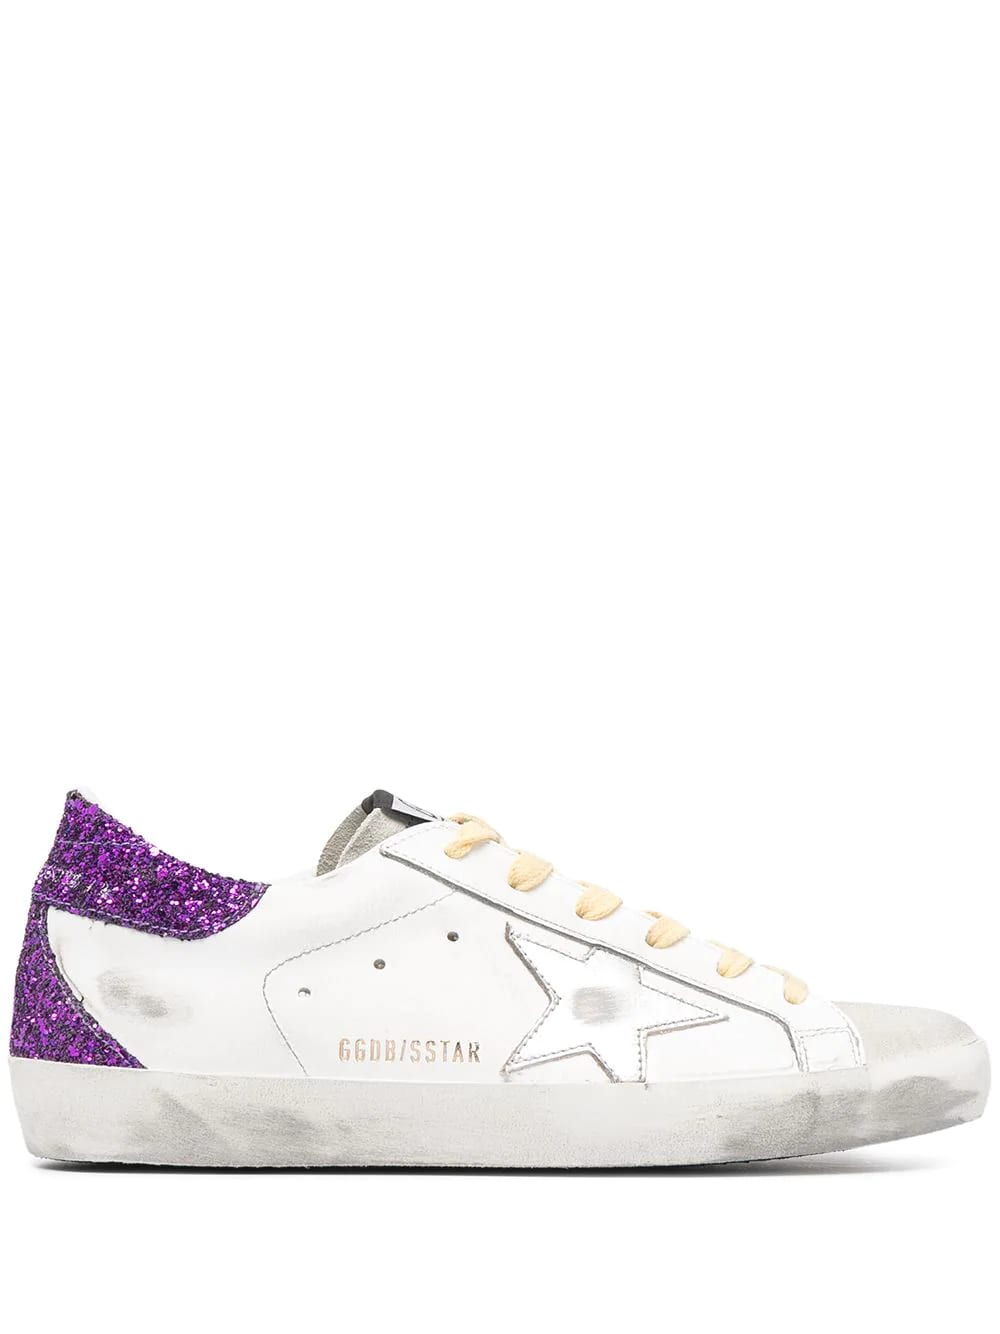 Buy Golden Goose Woman White Super-star Sneakers With Silver Star, Yellow Laces And Purple Glitter Spoiler online, shop Golden Goose shoes with free shipping